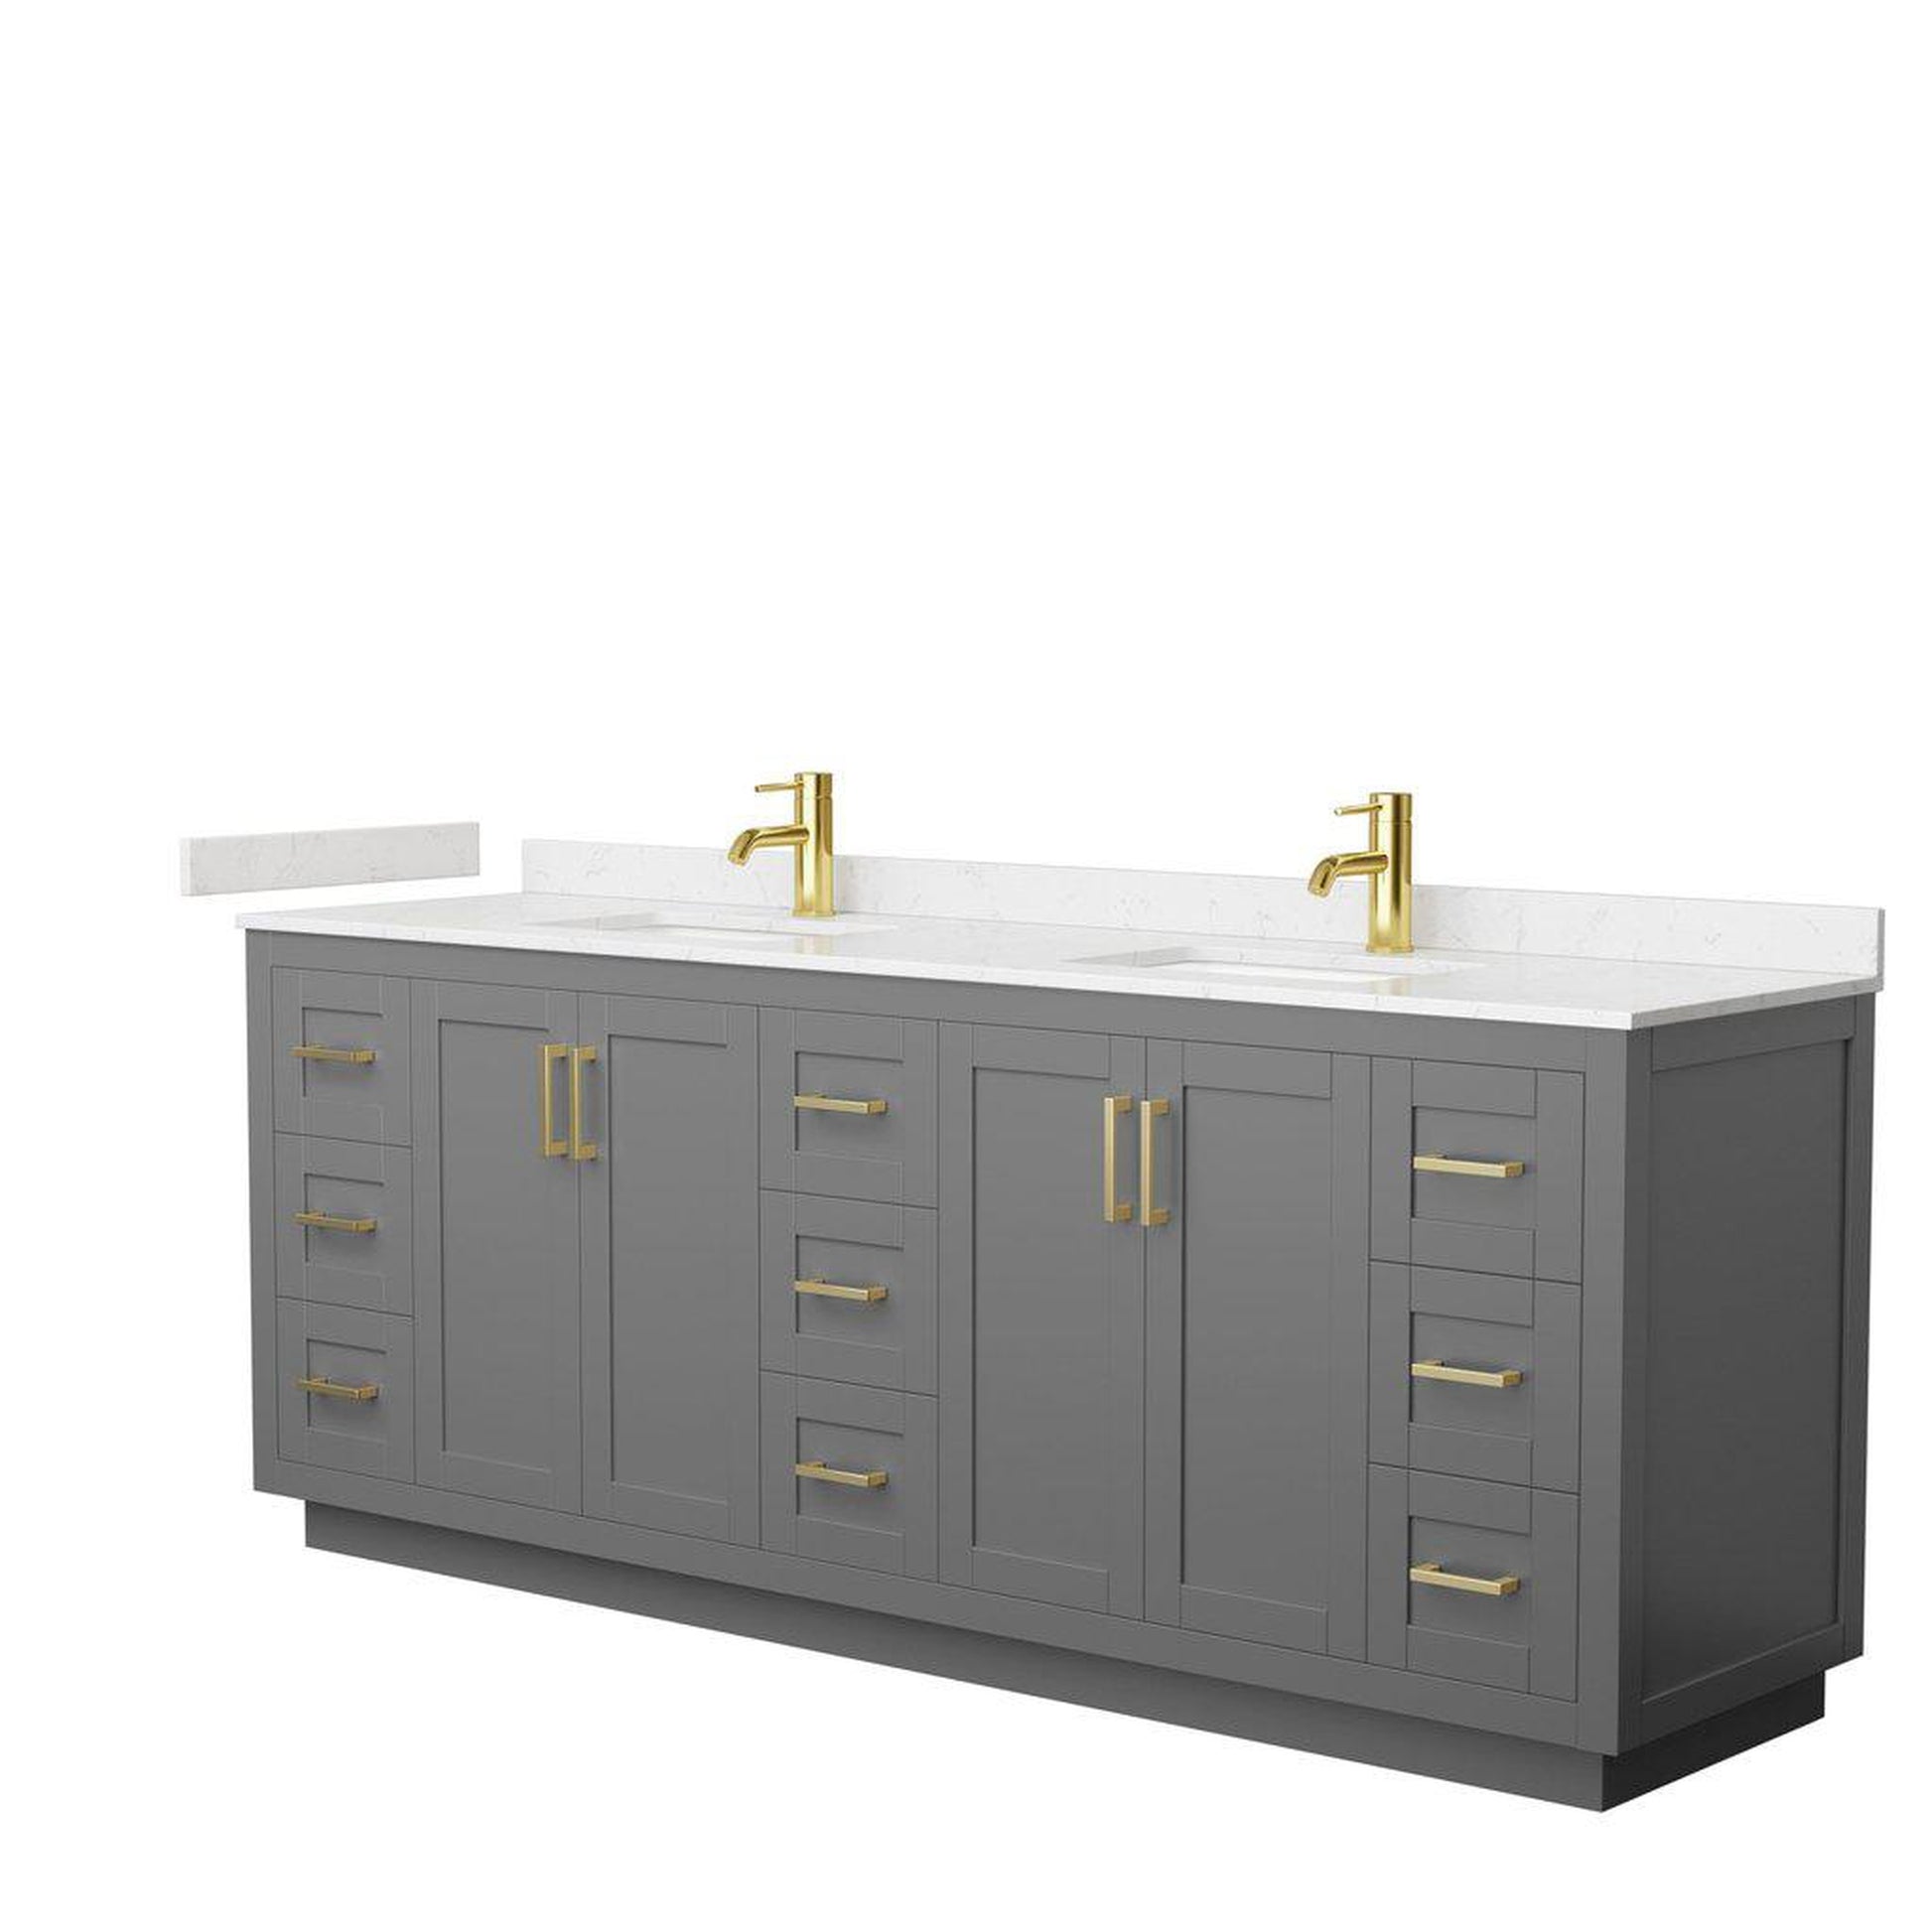 Wyndham Collection Miranda 84" Double Bathroom Dark Gray Vanity Set With Light-Vein Carrara Cultured Marble Countertop, Undermount Square Sink, And Brushed Gold Trim